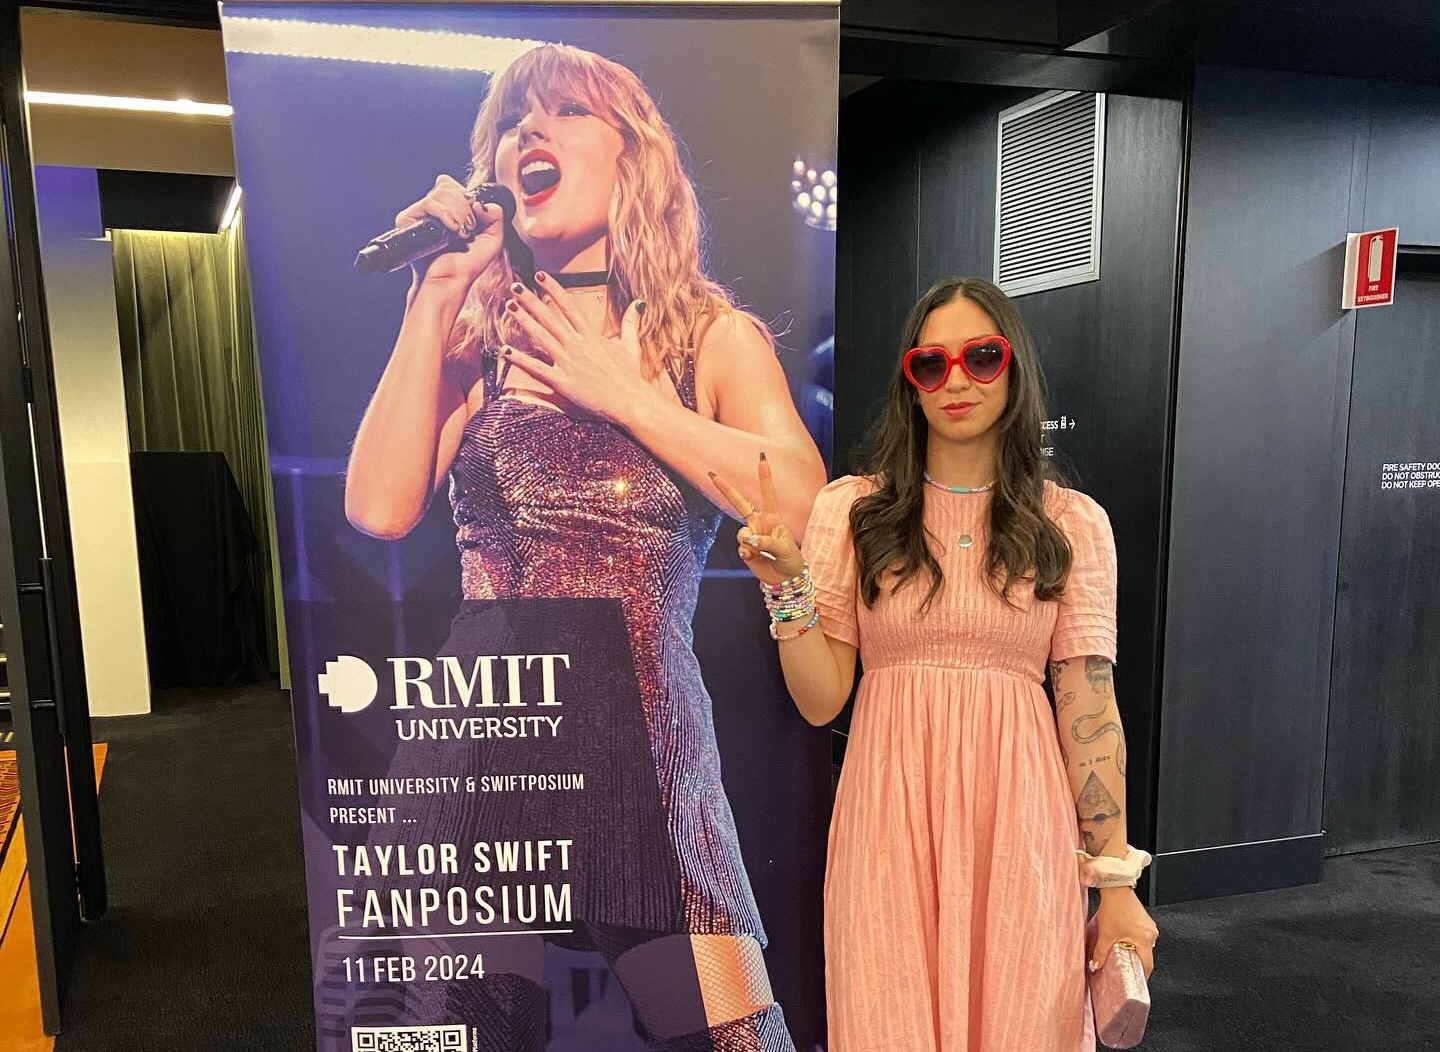 Jarin, in a peach dress and bright pink heart-shaped sunglasses, poses beside a standee of Taylor Swift at the Swiftposium event held in Melbourne, Australia. An overlay text reads (in bold): RMIT University. RMIT University and Switposium present Taylor Swift Fanposium, 11 Feb, 2023. Under the text is a QR code, as well as logos of the sponsors of the event. 